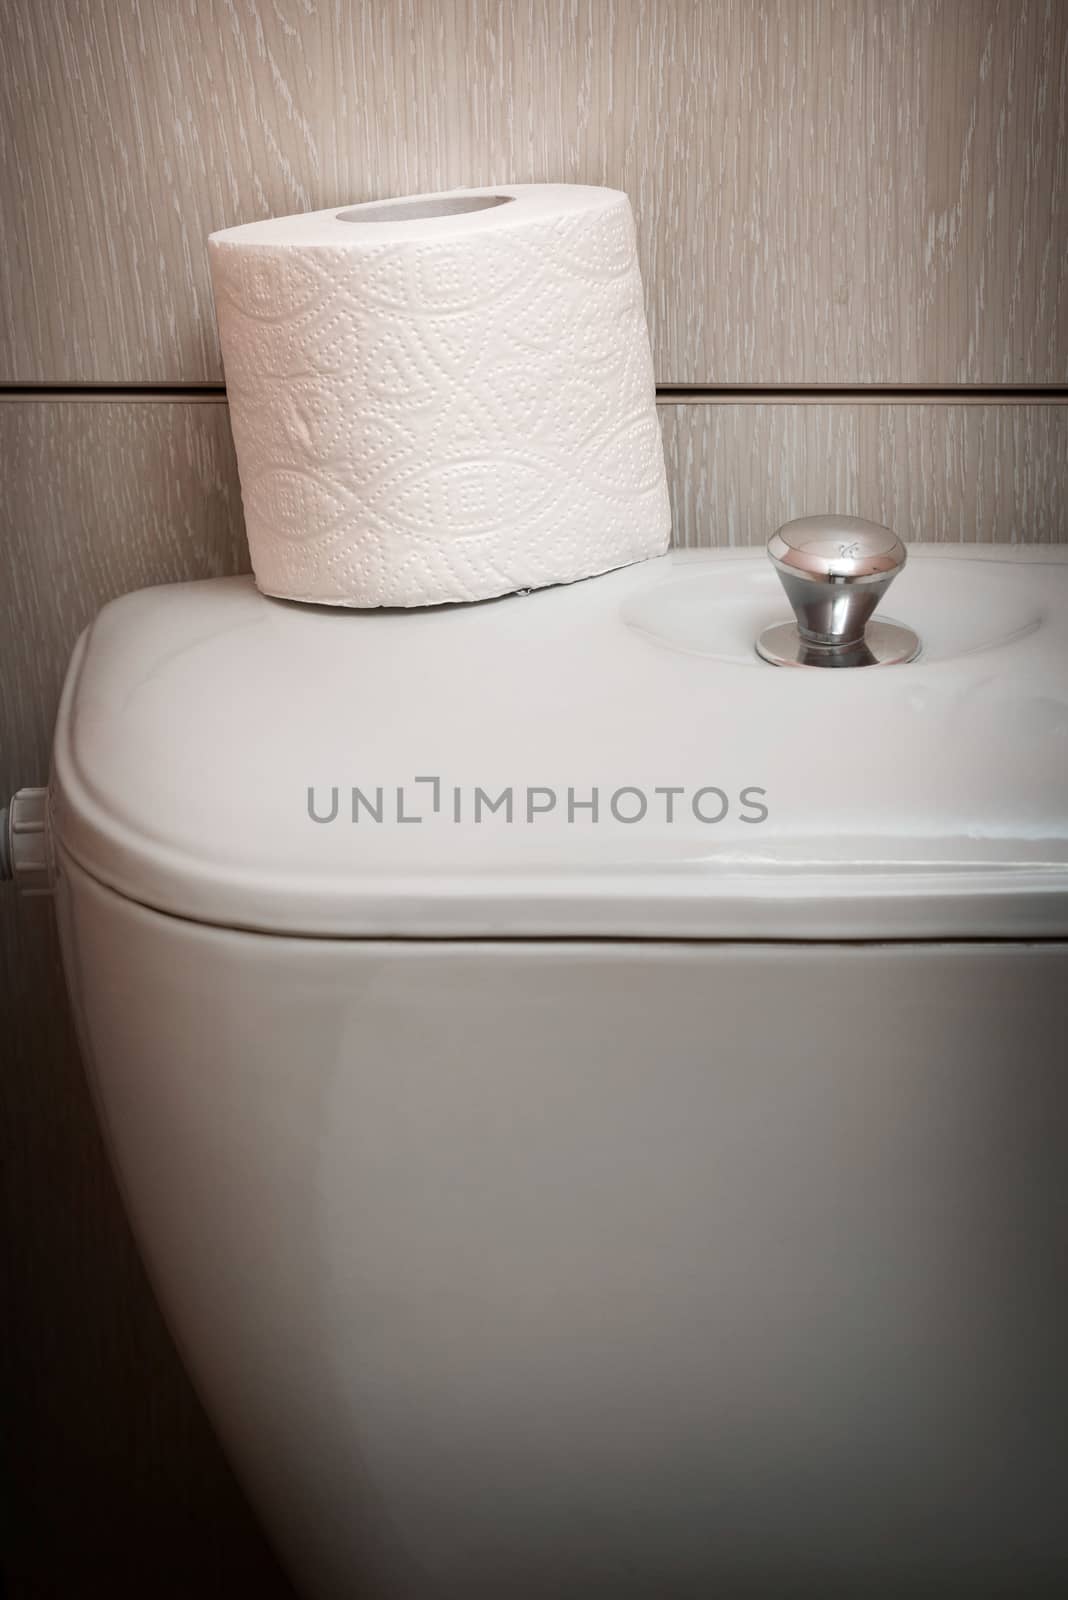 Hygienic Toilet Paper Roll in WC by MaxalTamor